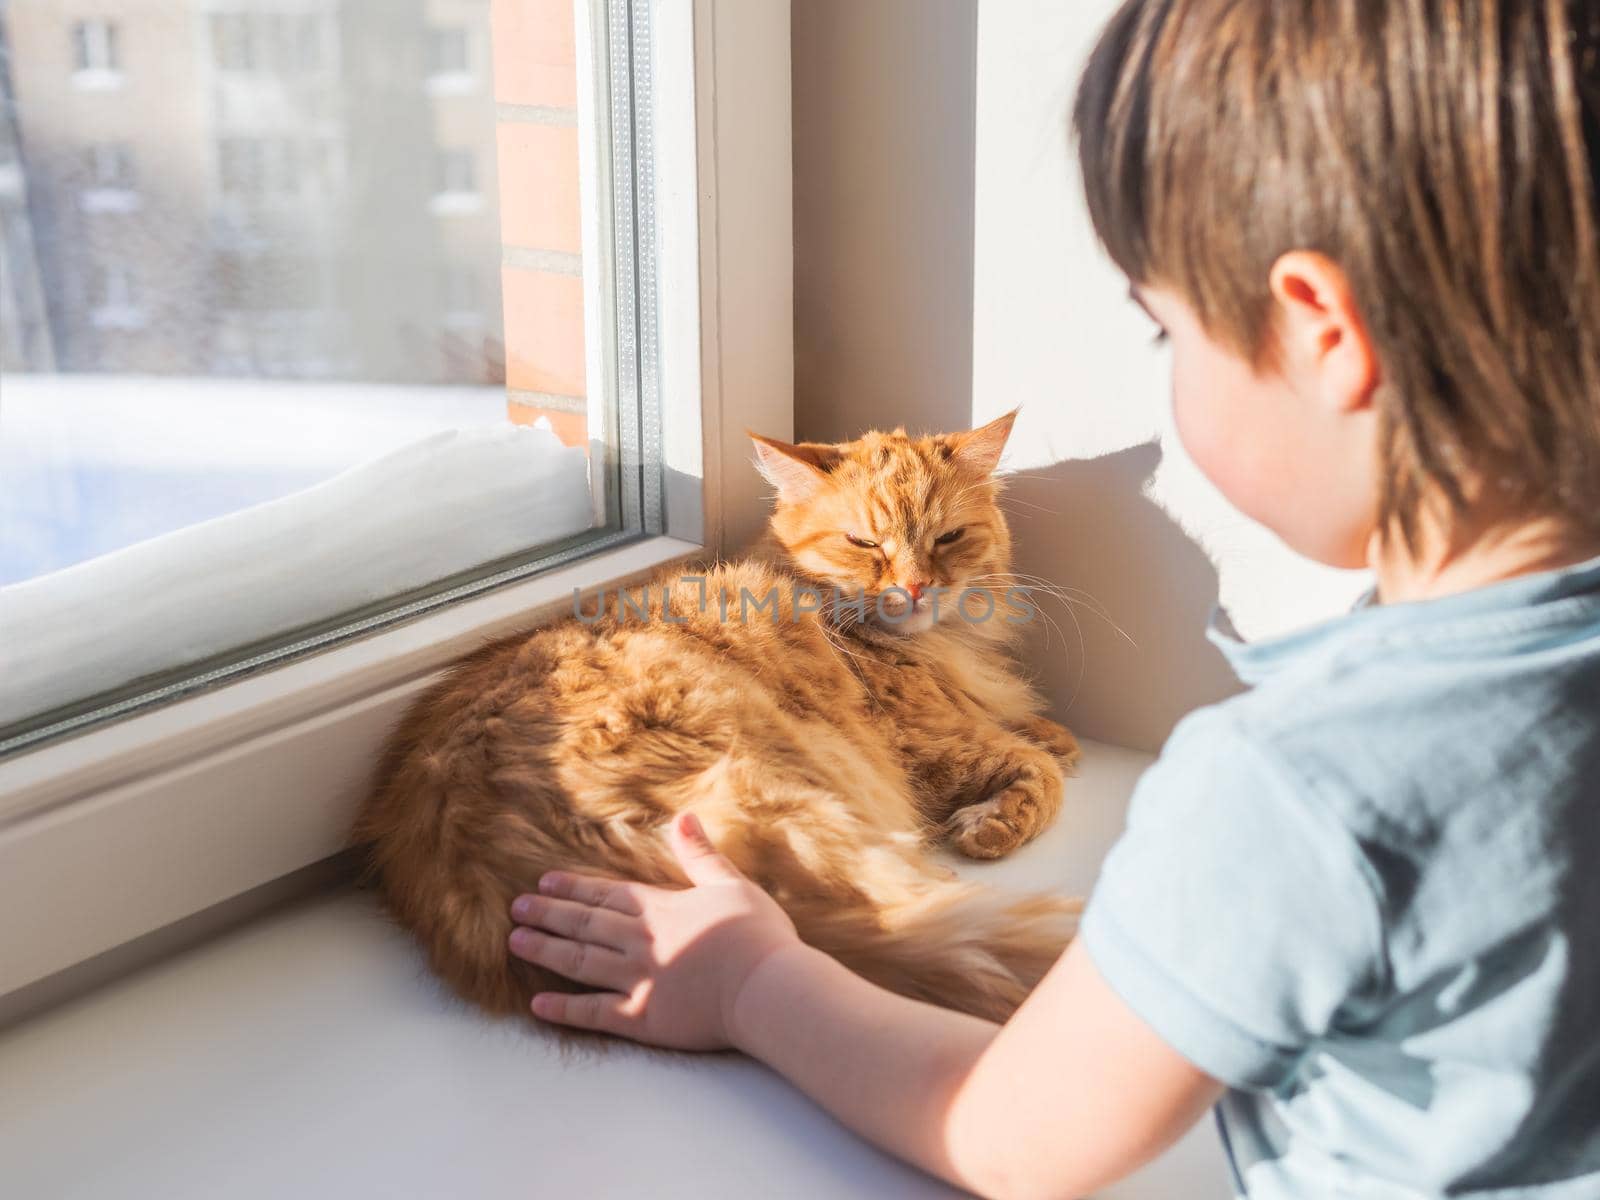 Toddler strokes sleepy ginger cat. Little boy touches cute fluffy pet. Kid and domestic animal on windowsill. Winter season at cozy home. by aksenovko